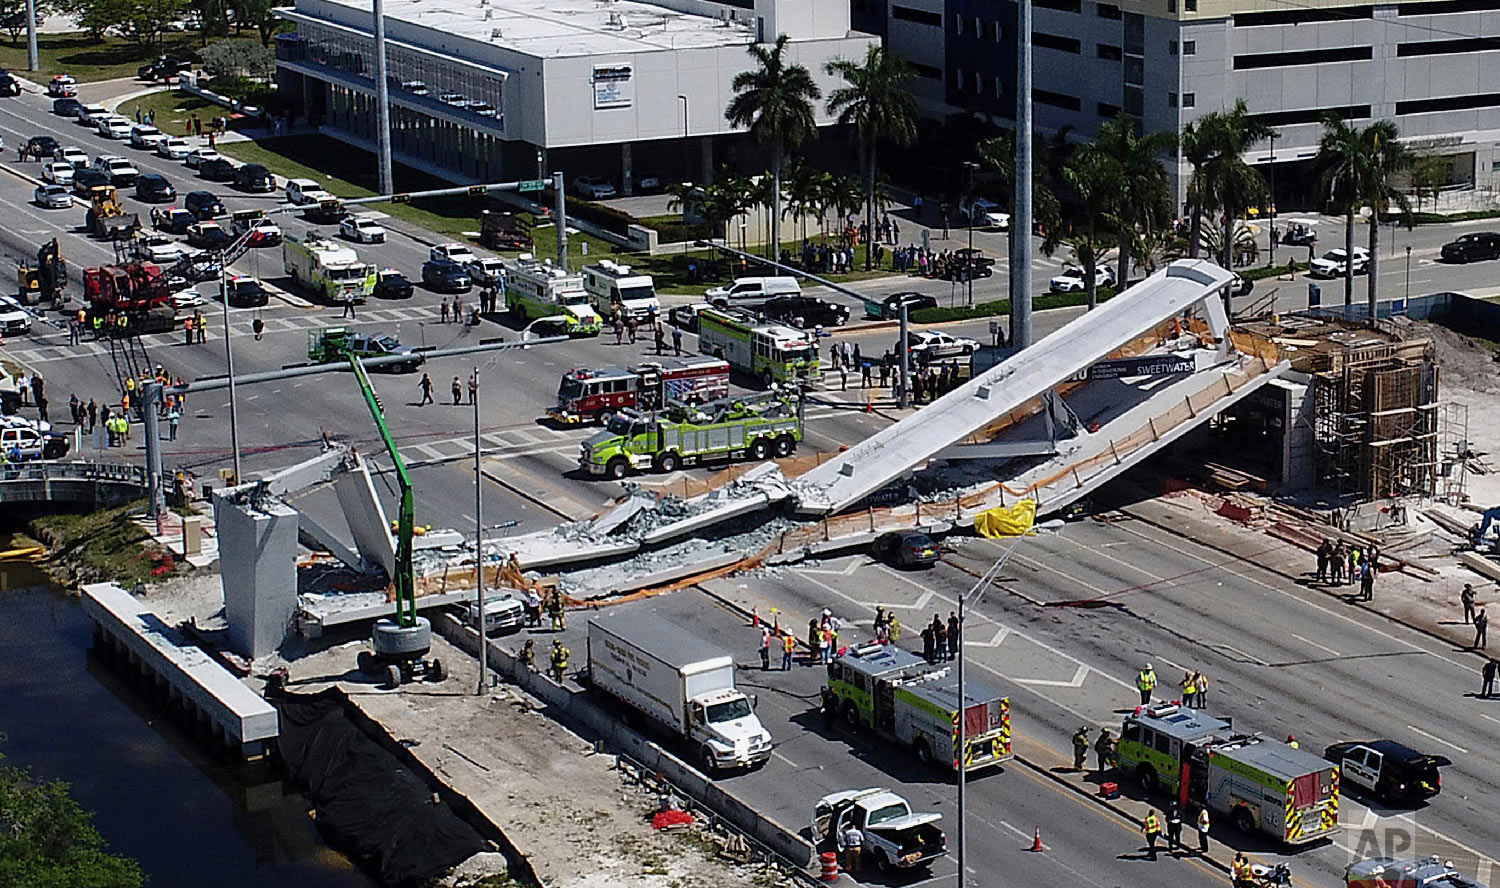  Emergency personnel respond after a brand-new pedestrian bridge collapsed onto a highway at Florida International University in Miami, crushing cars and killing several people, on March 15, 2018. (Pedro Portal/Miami Herald via AP) 